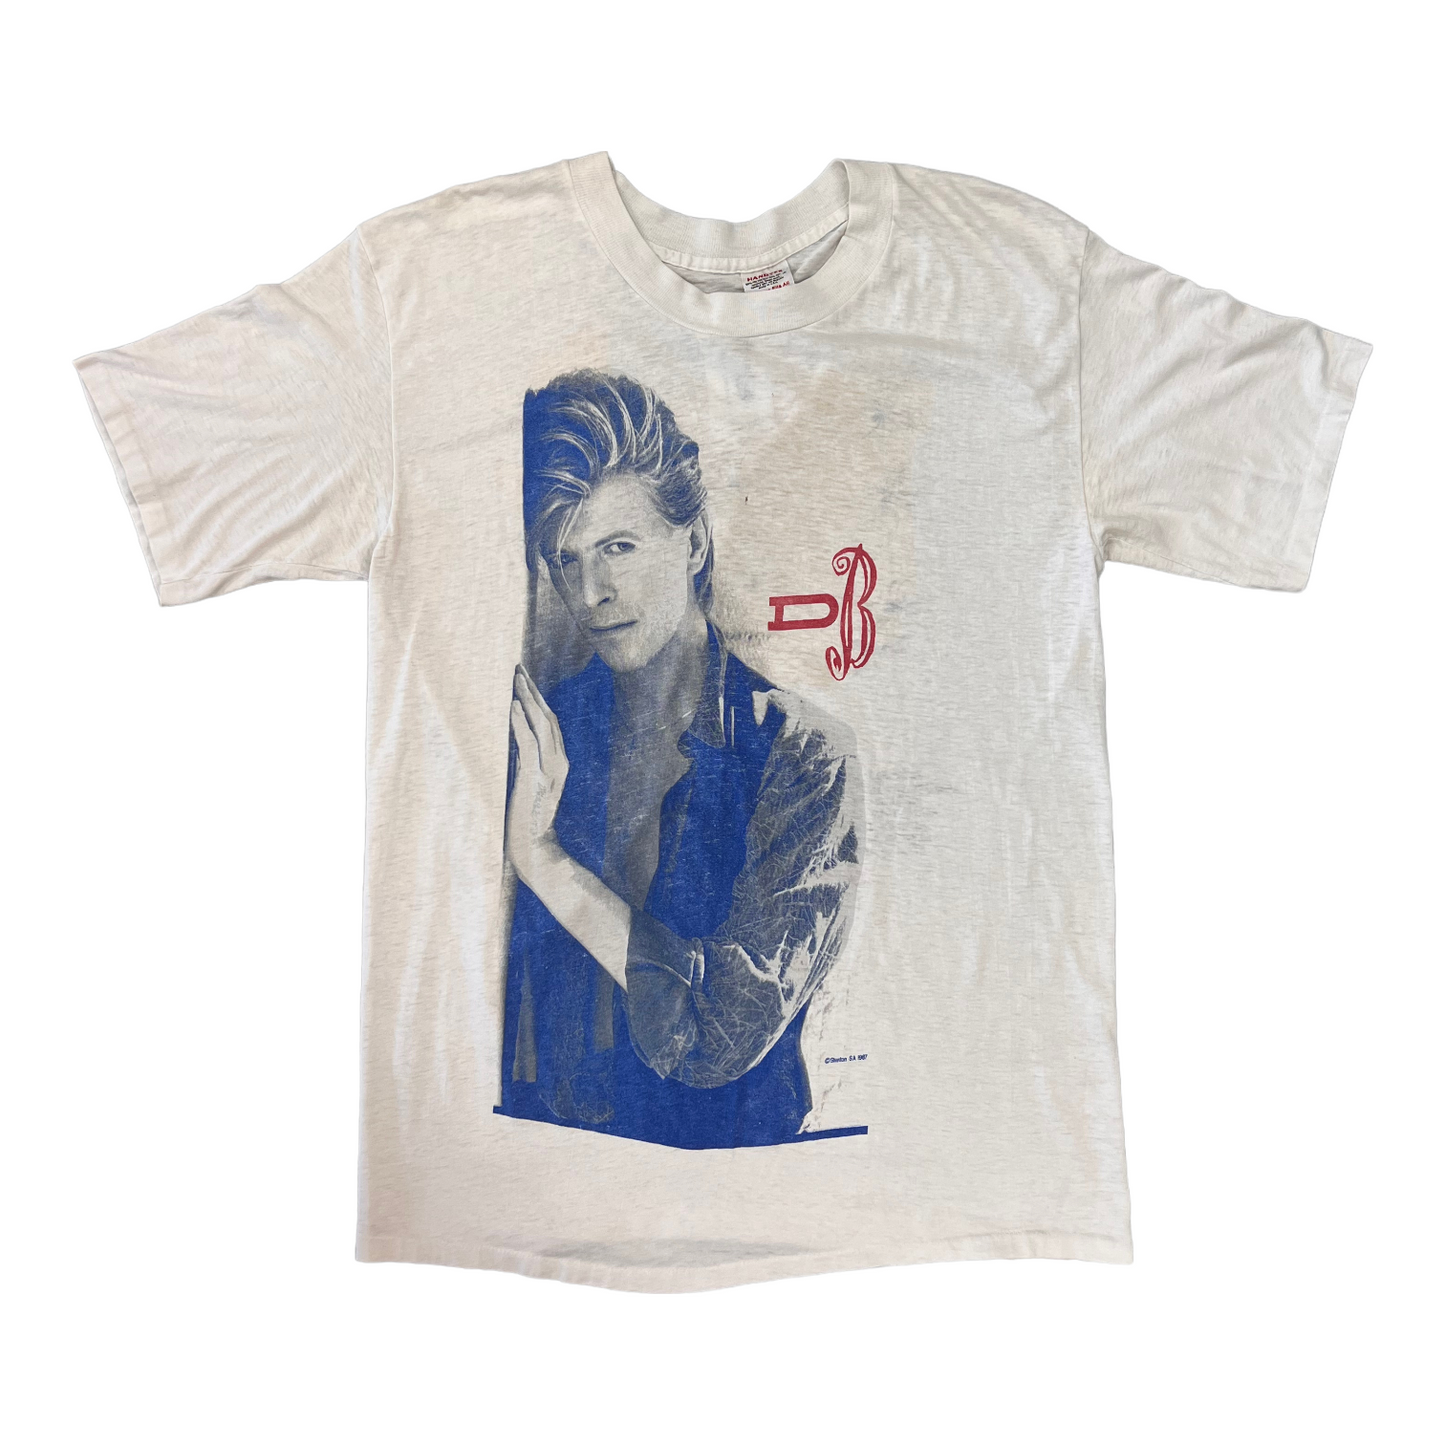 1987 David Bowie “ The glass spider tour” band tee